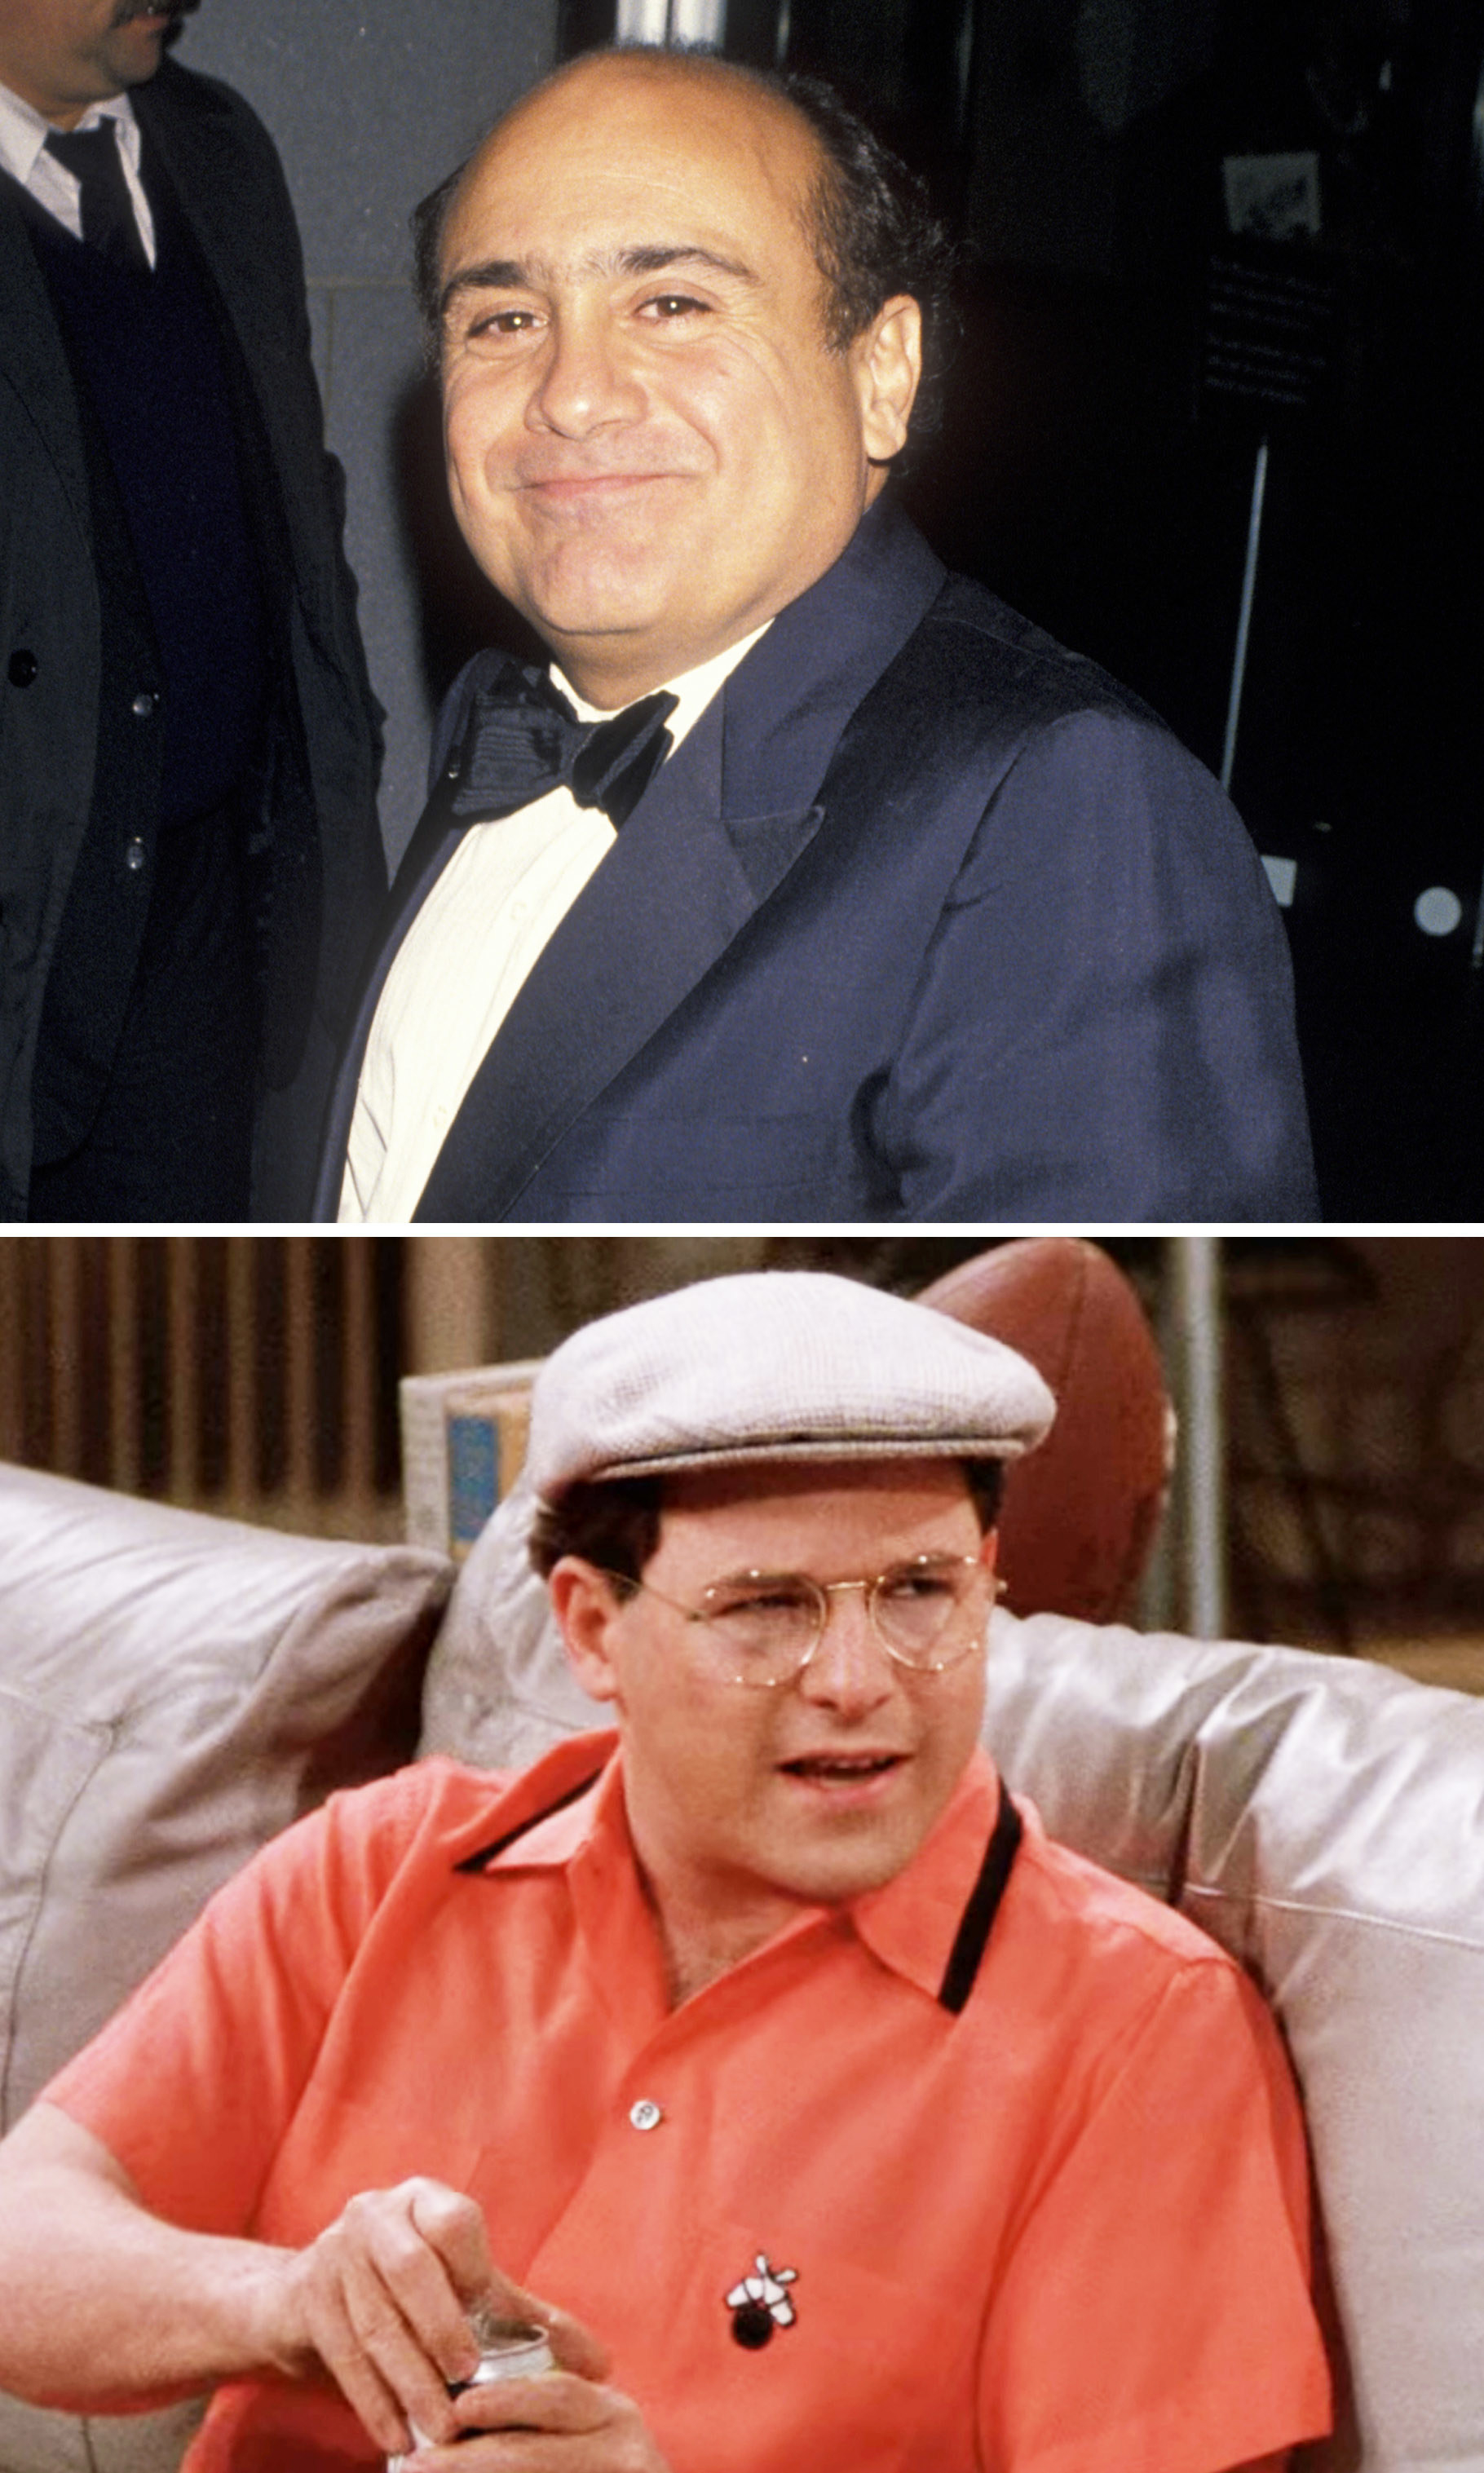 A close-up of Danny DeVito above a shot of Jason Alexander in Seinfeld